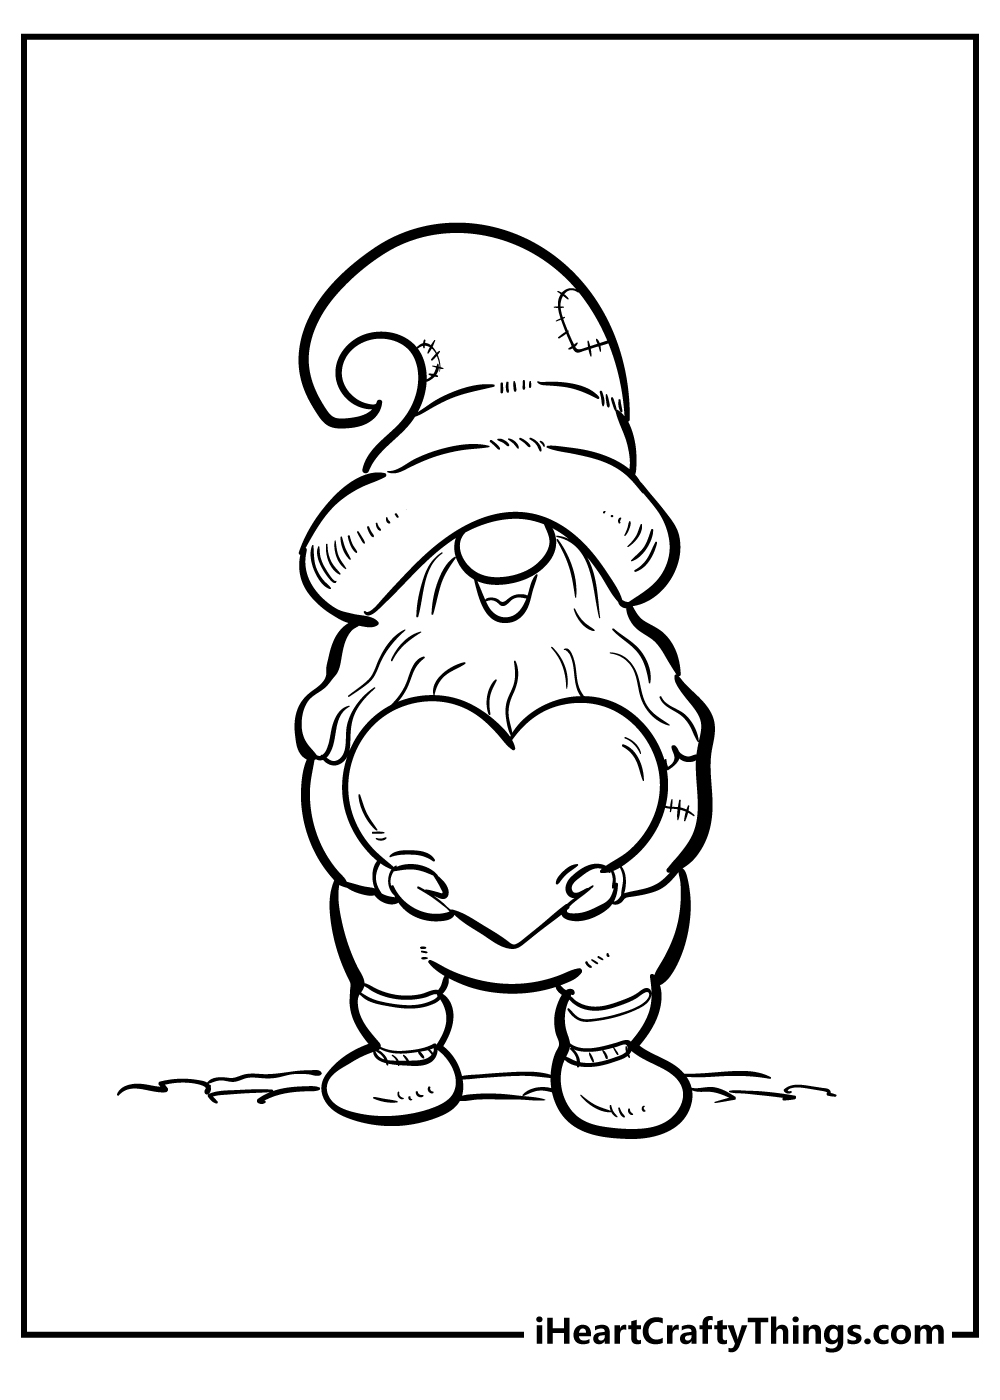 Gnomes Coloring Sheet for children free download